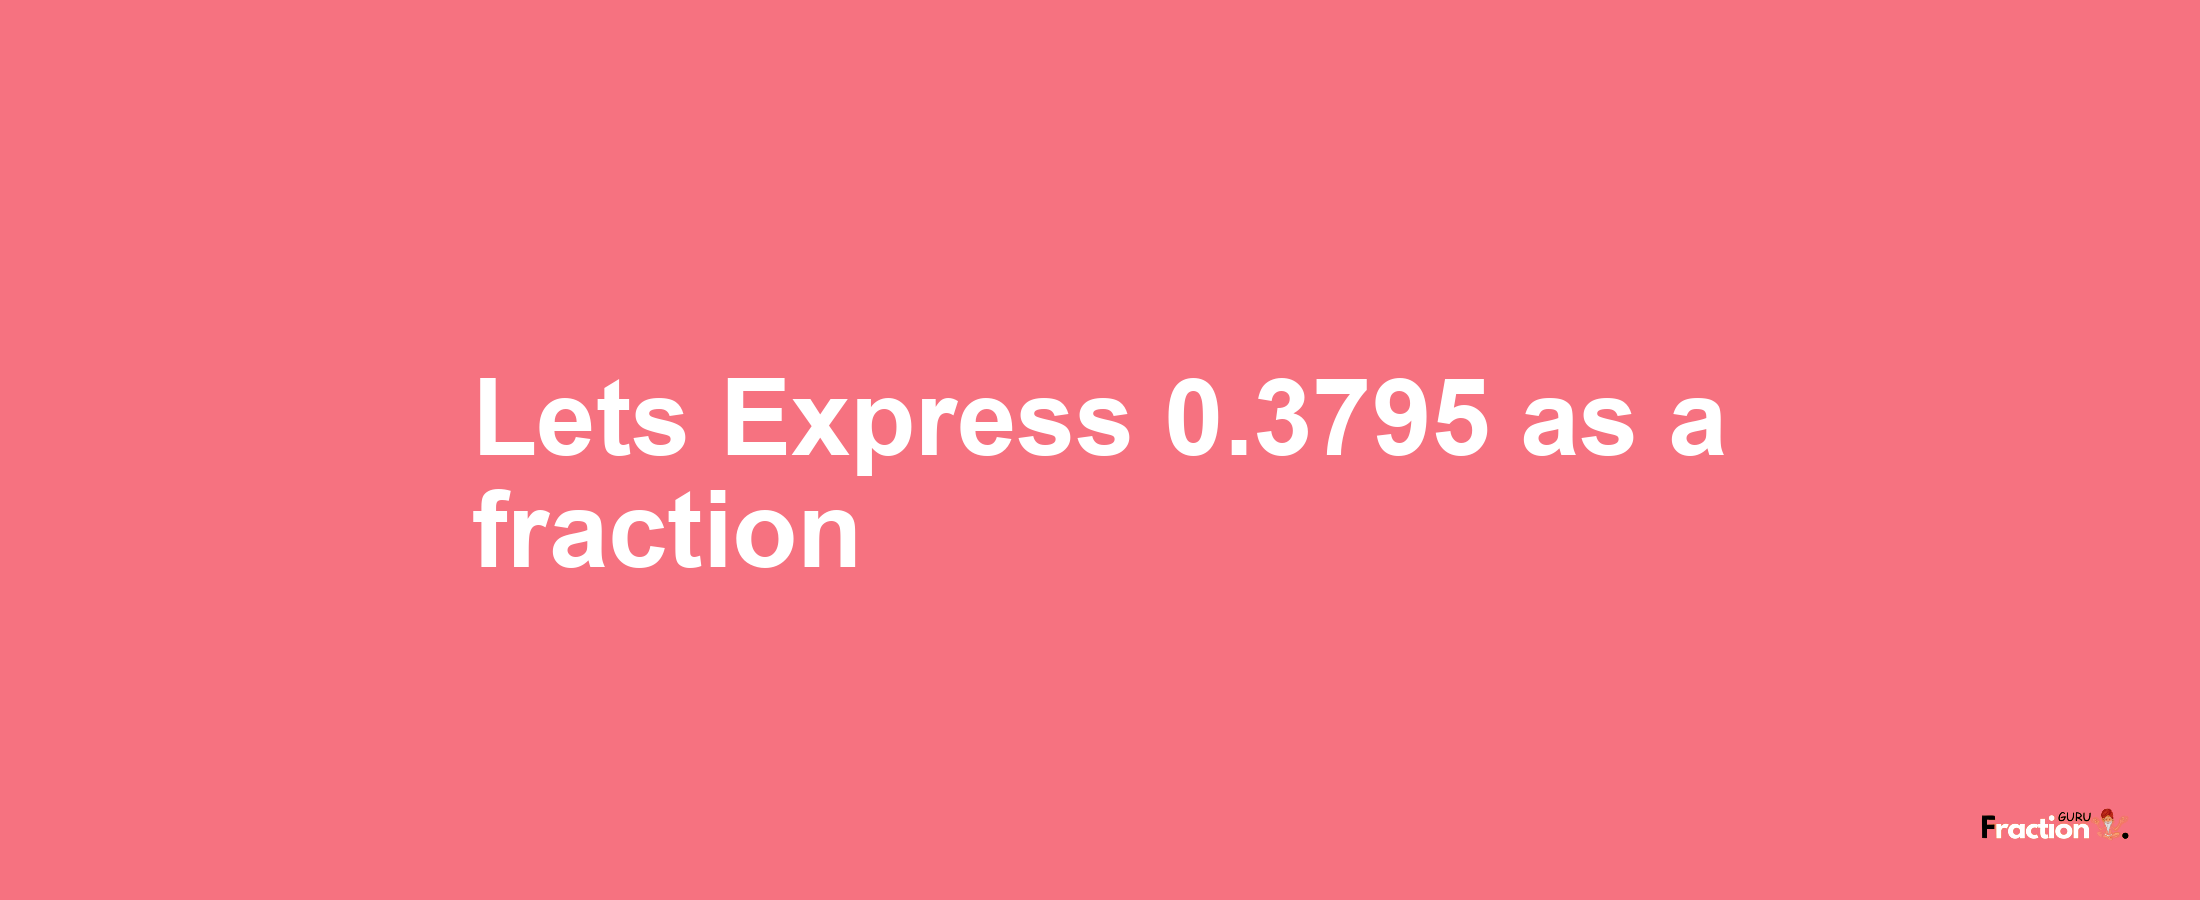 Lets Express 0.3795 as afraction